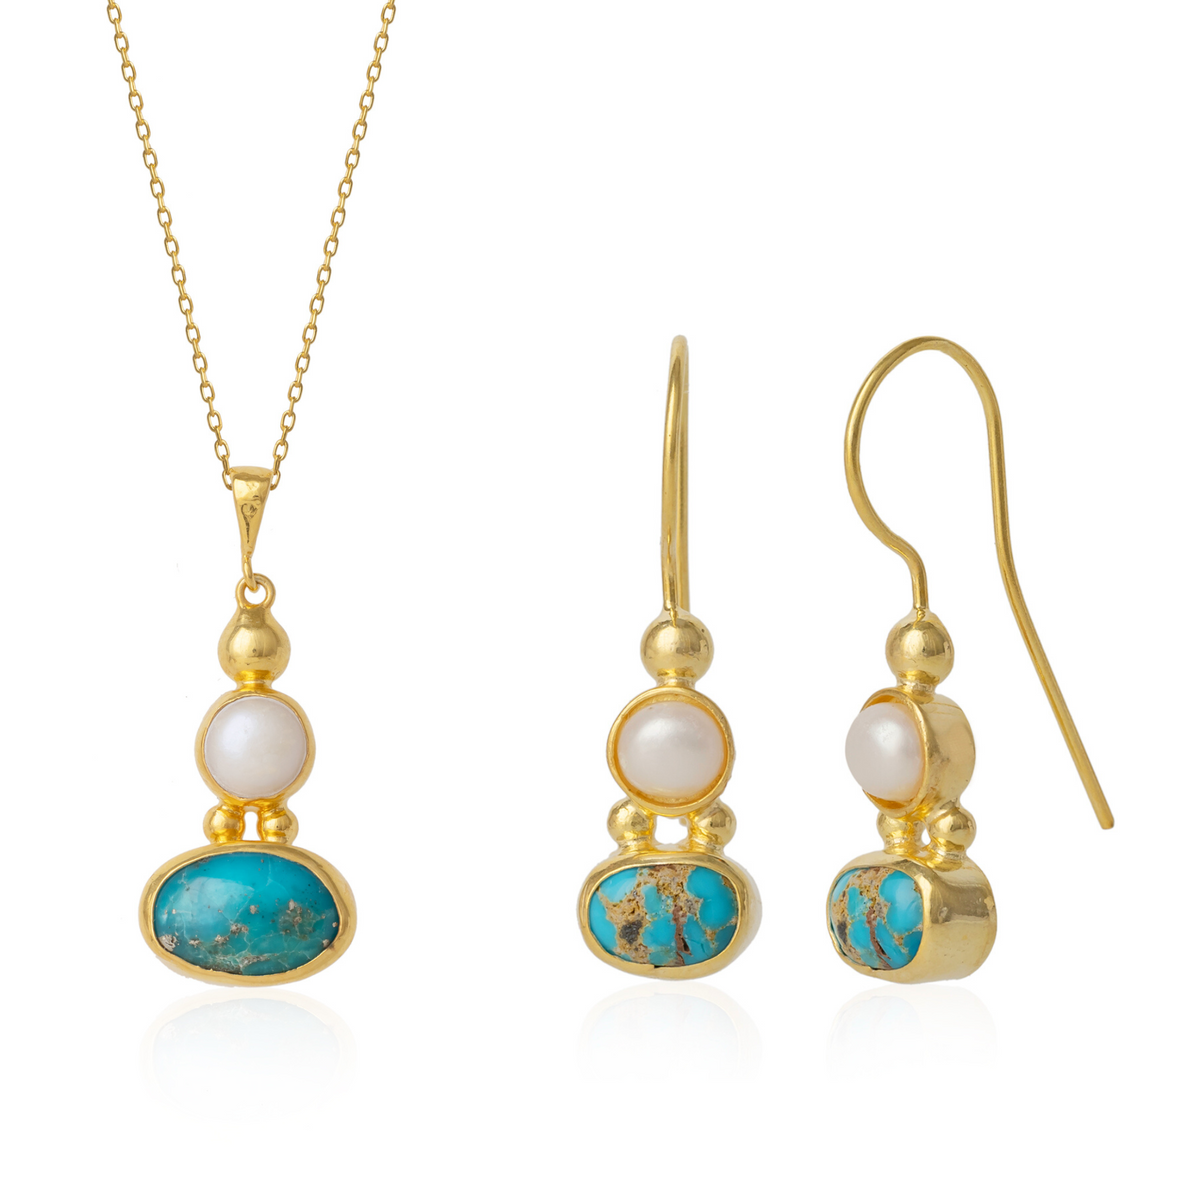 Turquoise Authentic Pendant and Earring Sterling Silver Gold Plated Set